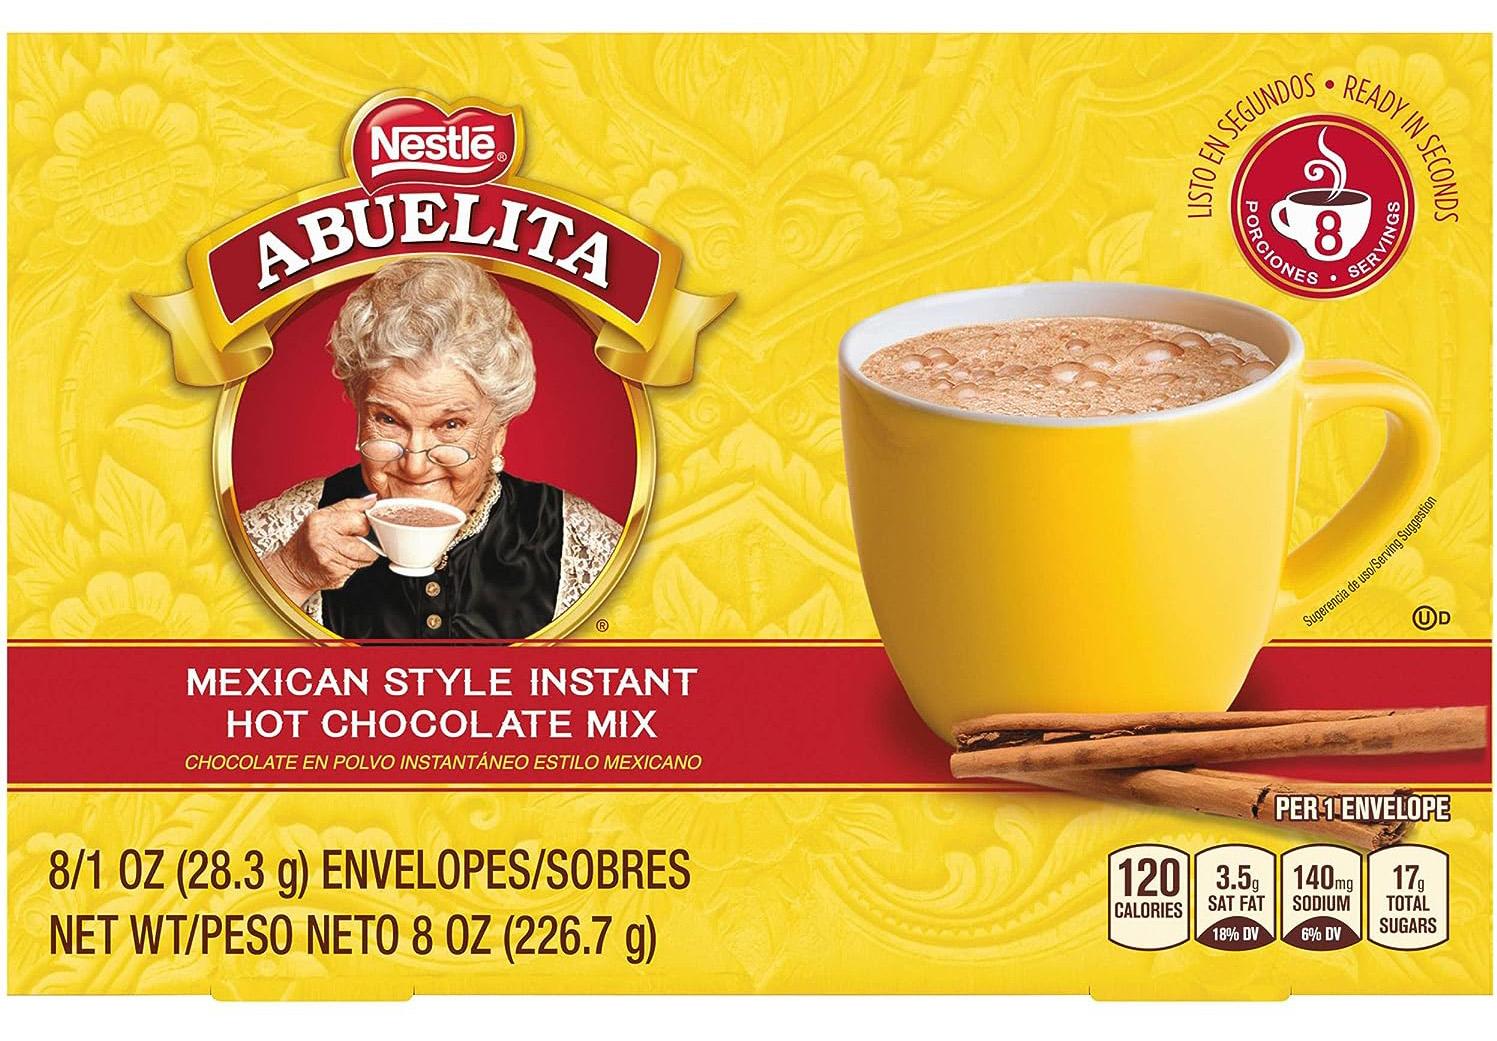 Abuelita Mexican Style Instant Hot Chocolate Drink Mix Packets for $1.95 Shipped